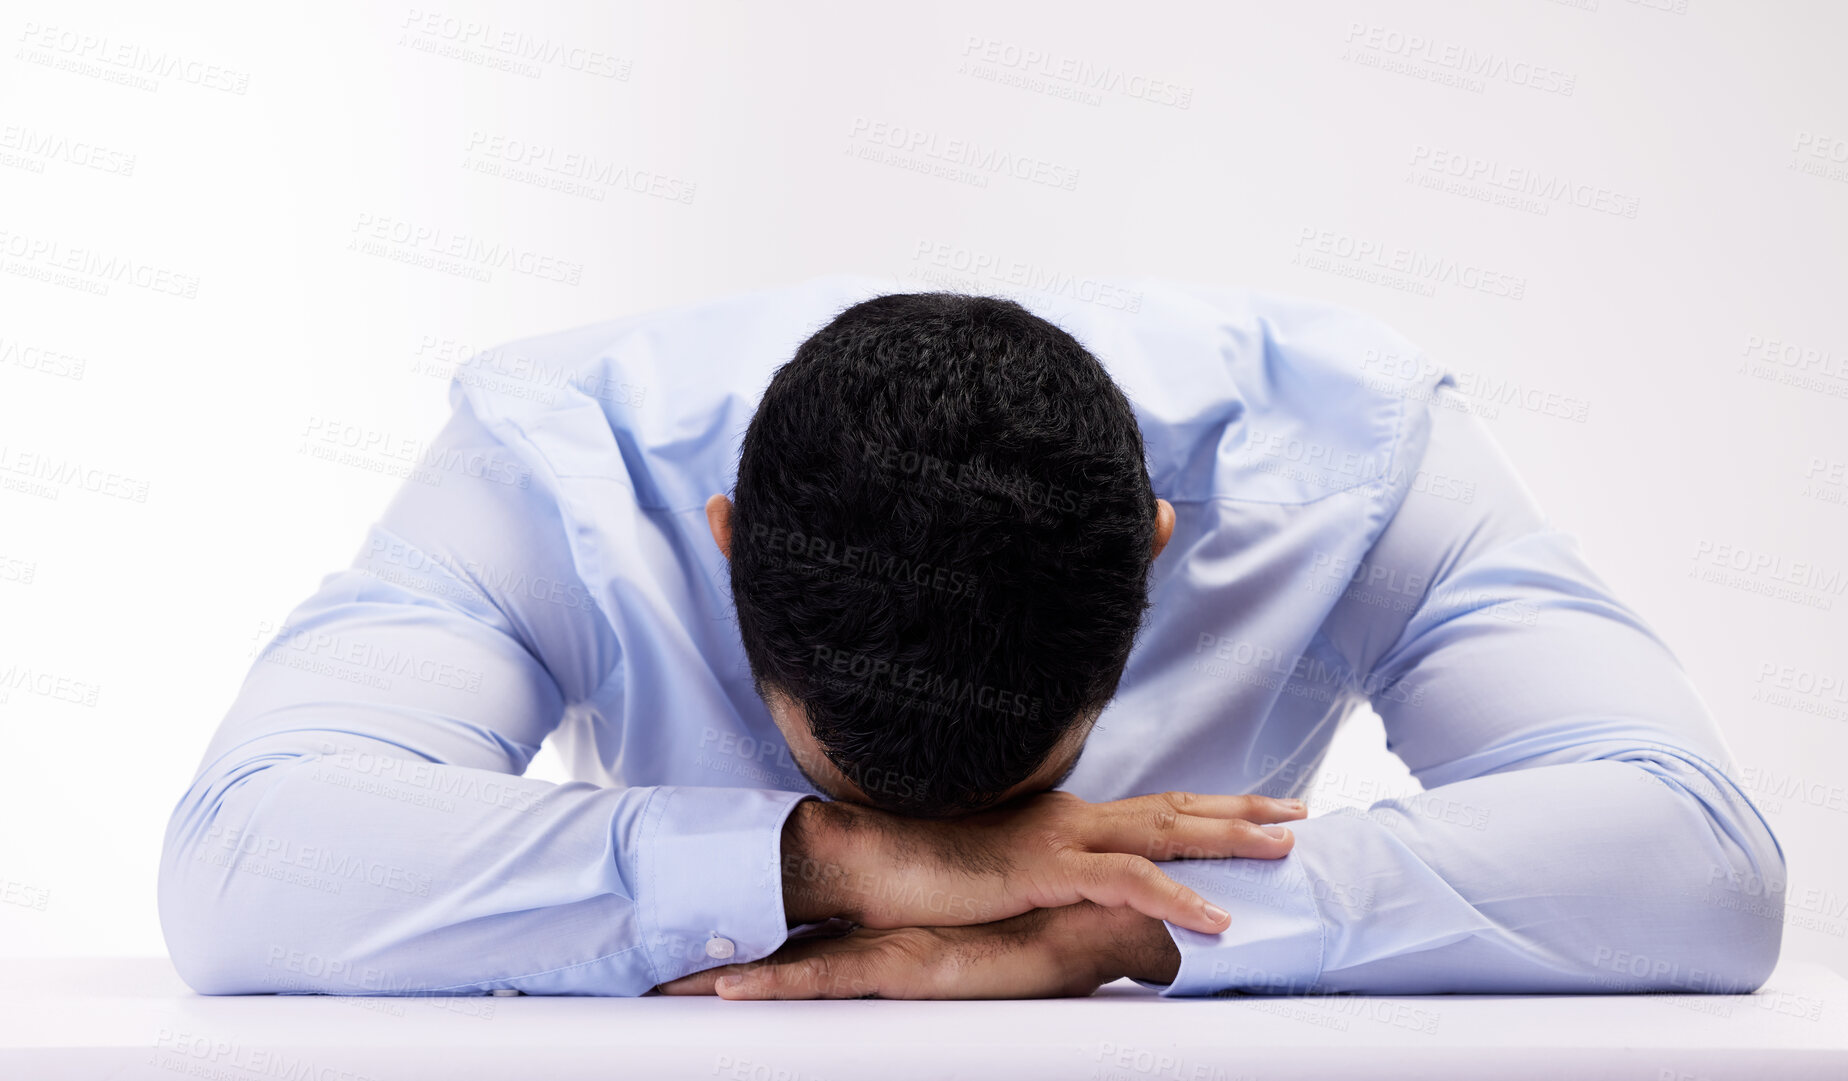 Buy stock photo Studio shot of a young businessman lying with his head down against a white background